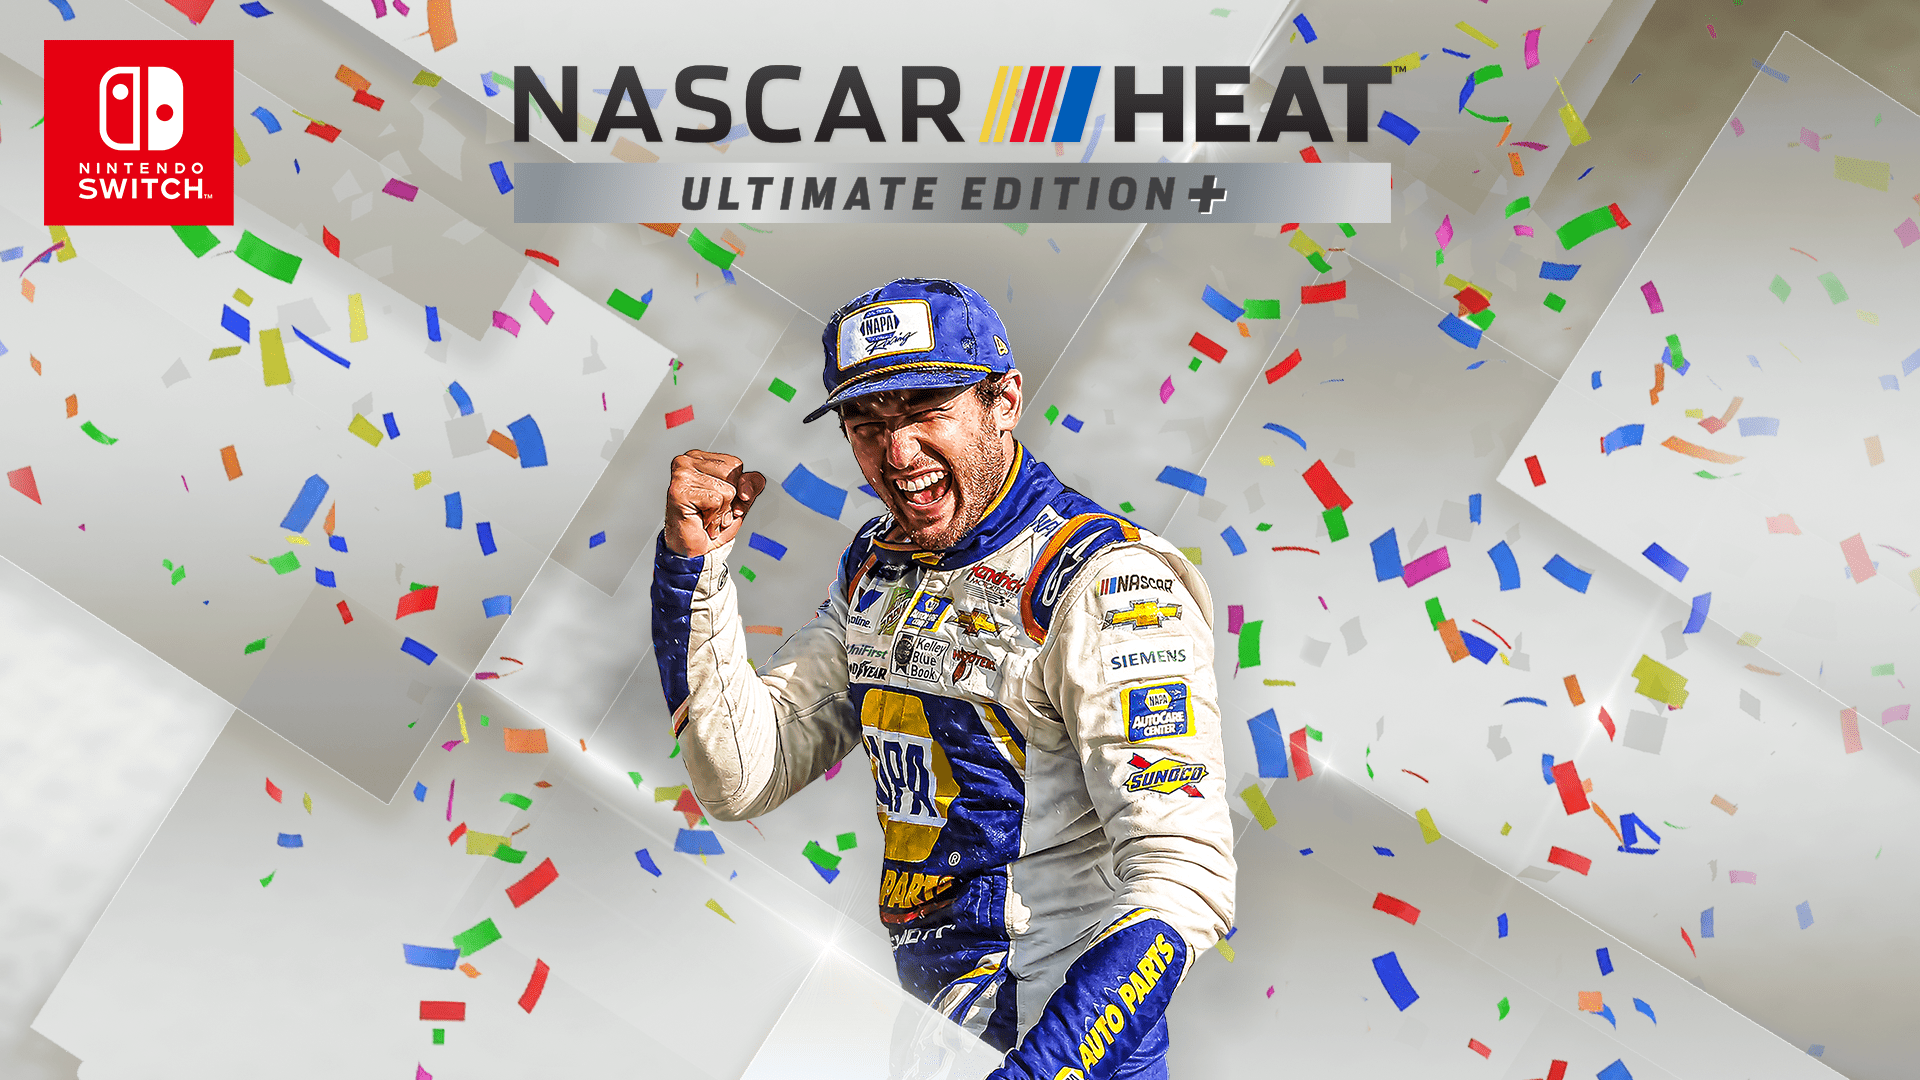 NASCAR Heat Ultimate Edition+ confirmed, announced for Nintendo Switch